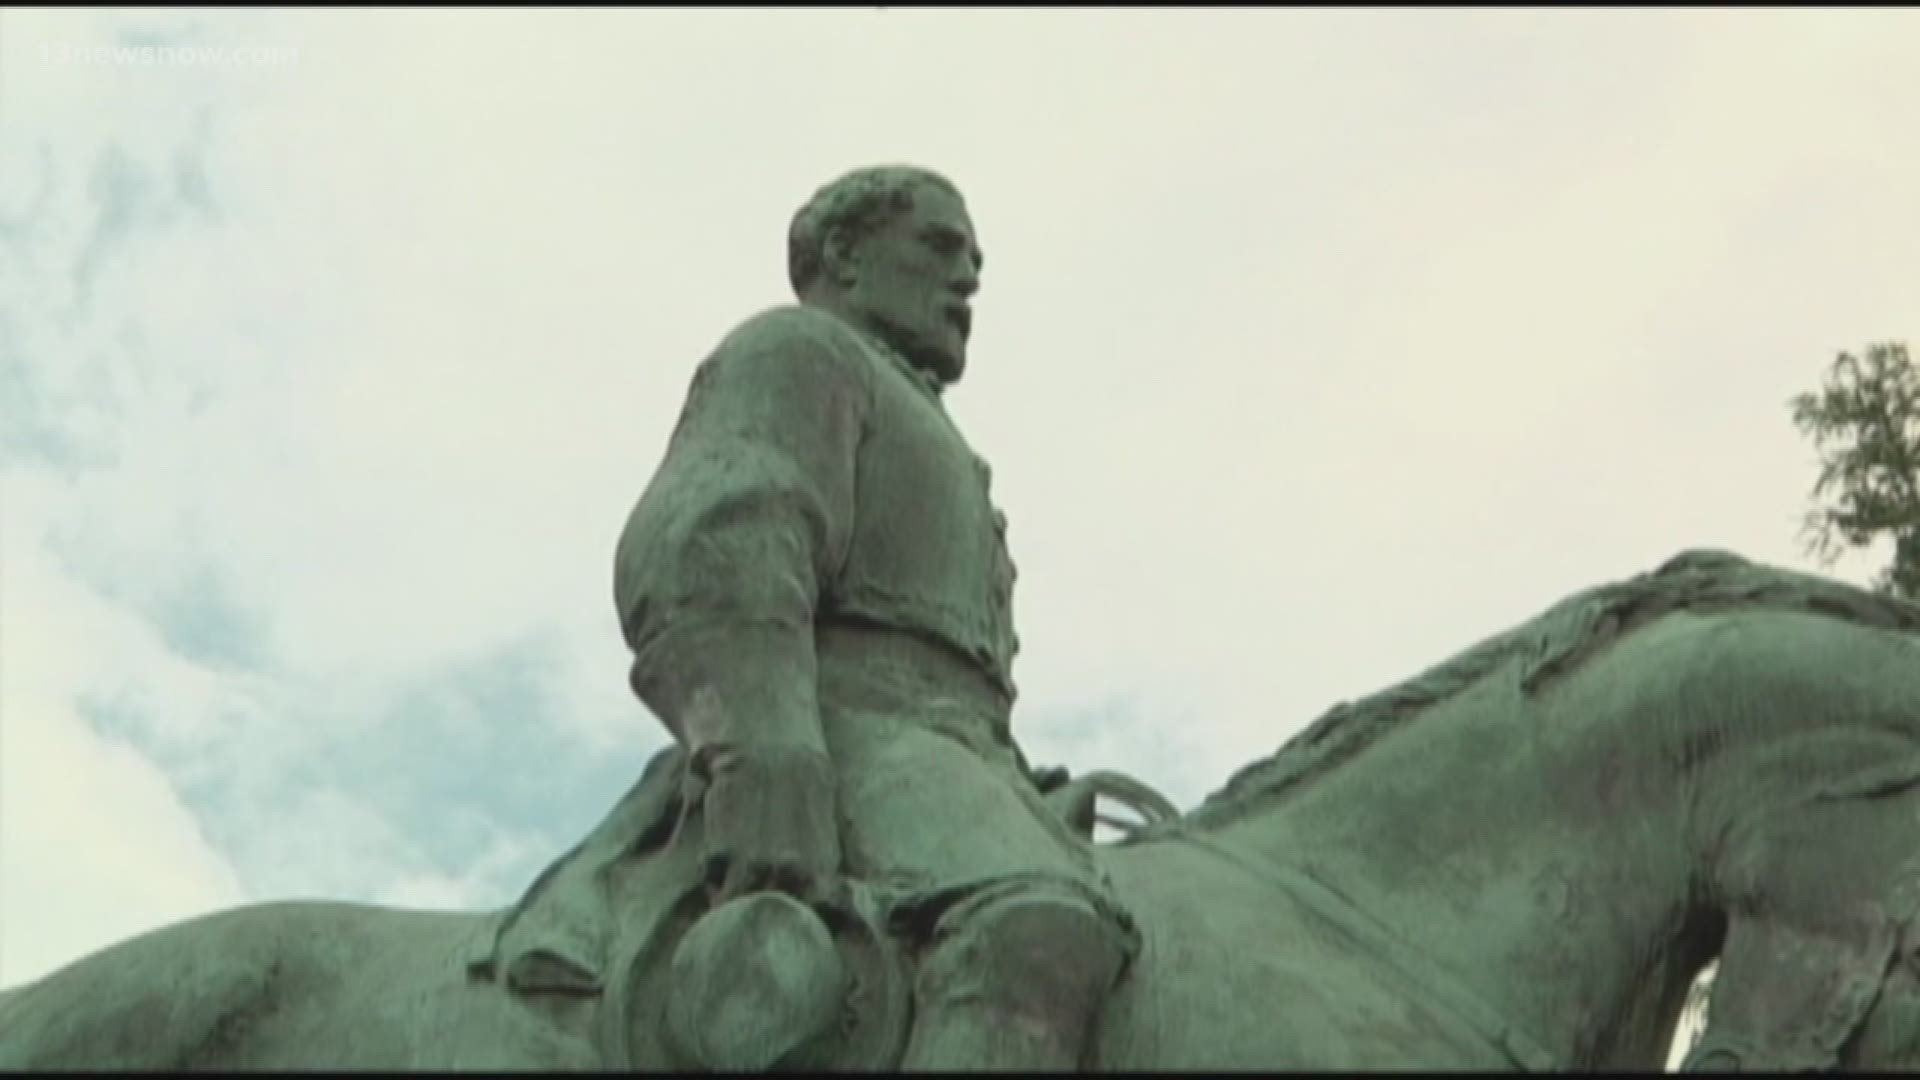 A lawsuit over confederate statues in Charlottesville could mean trouble for the city.